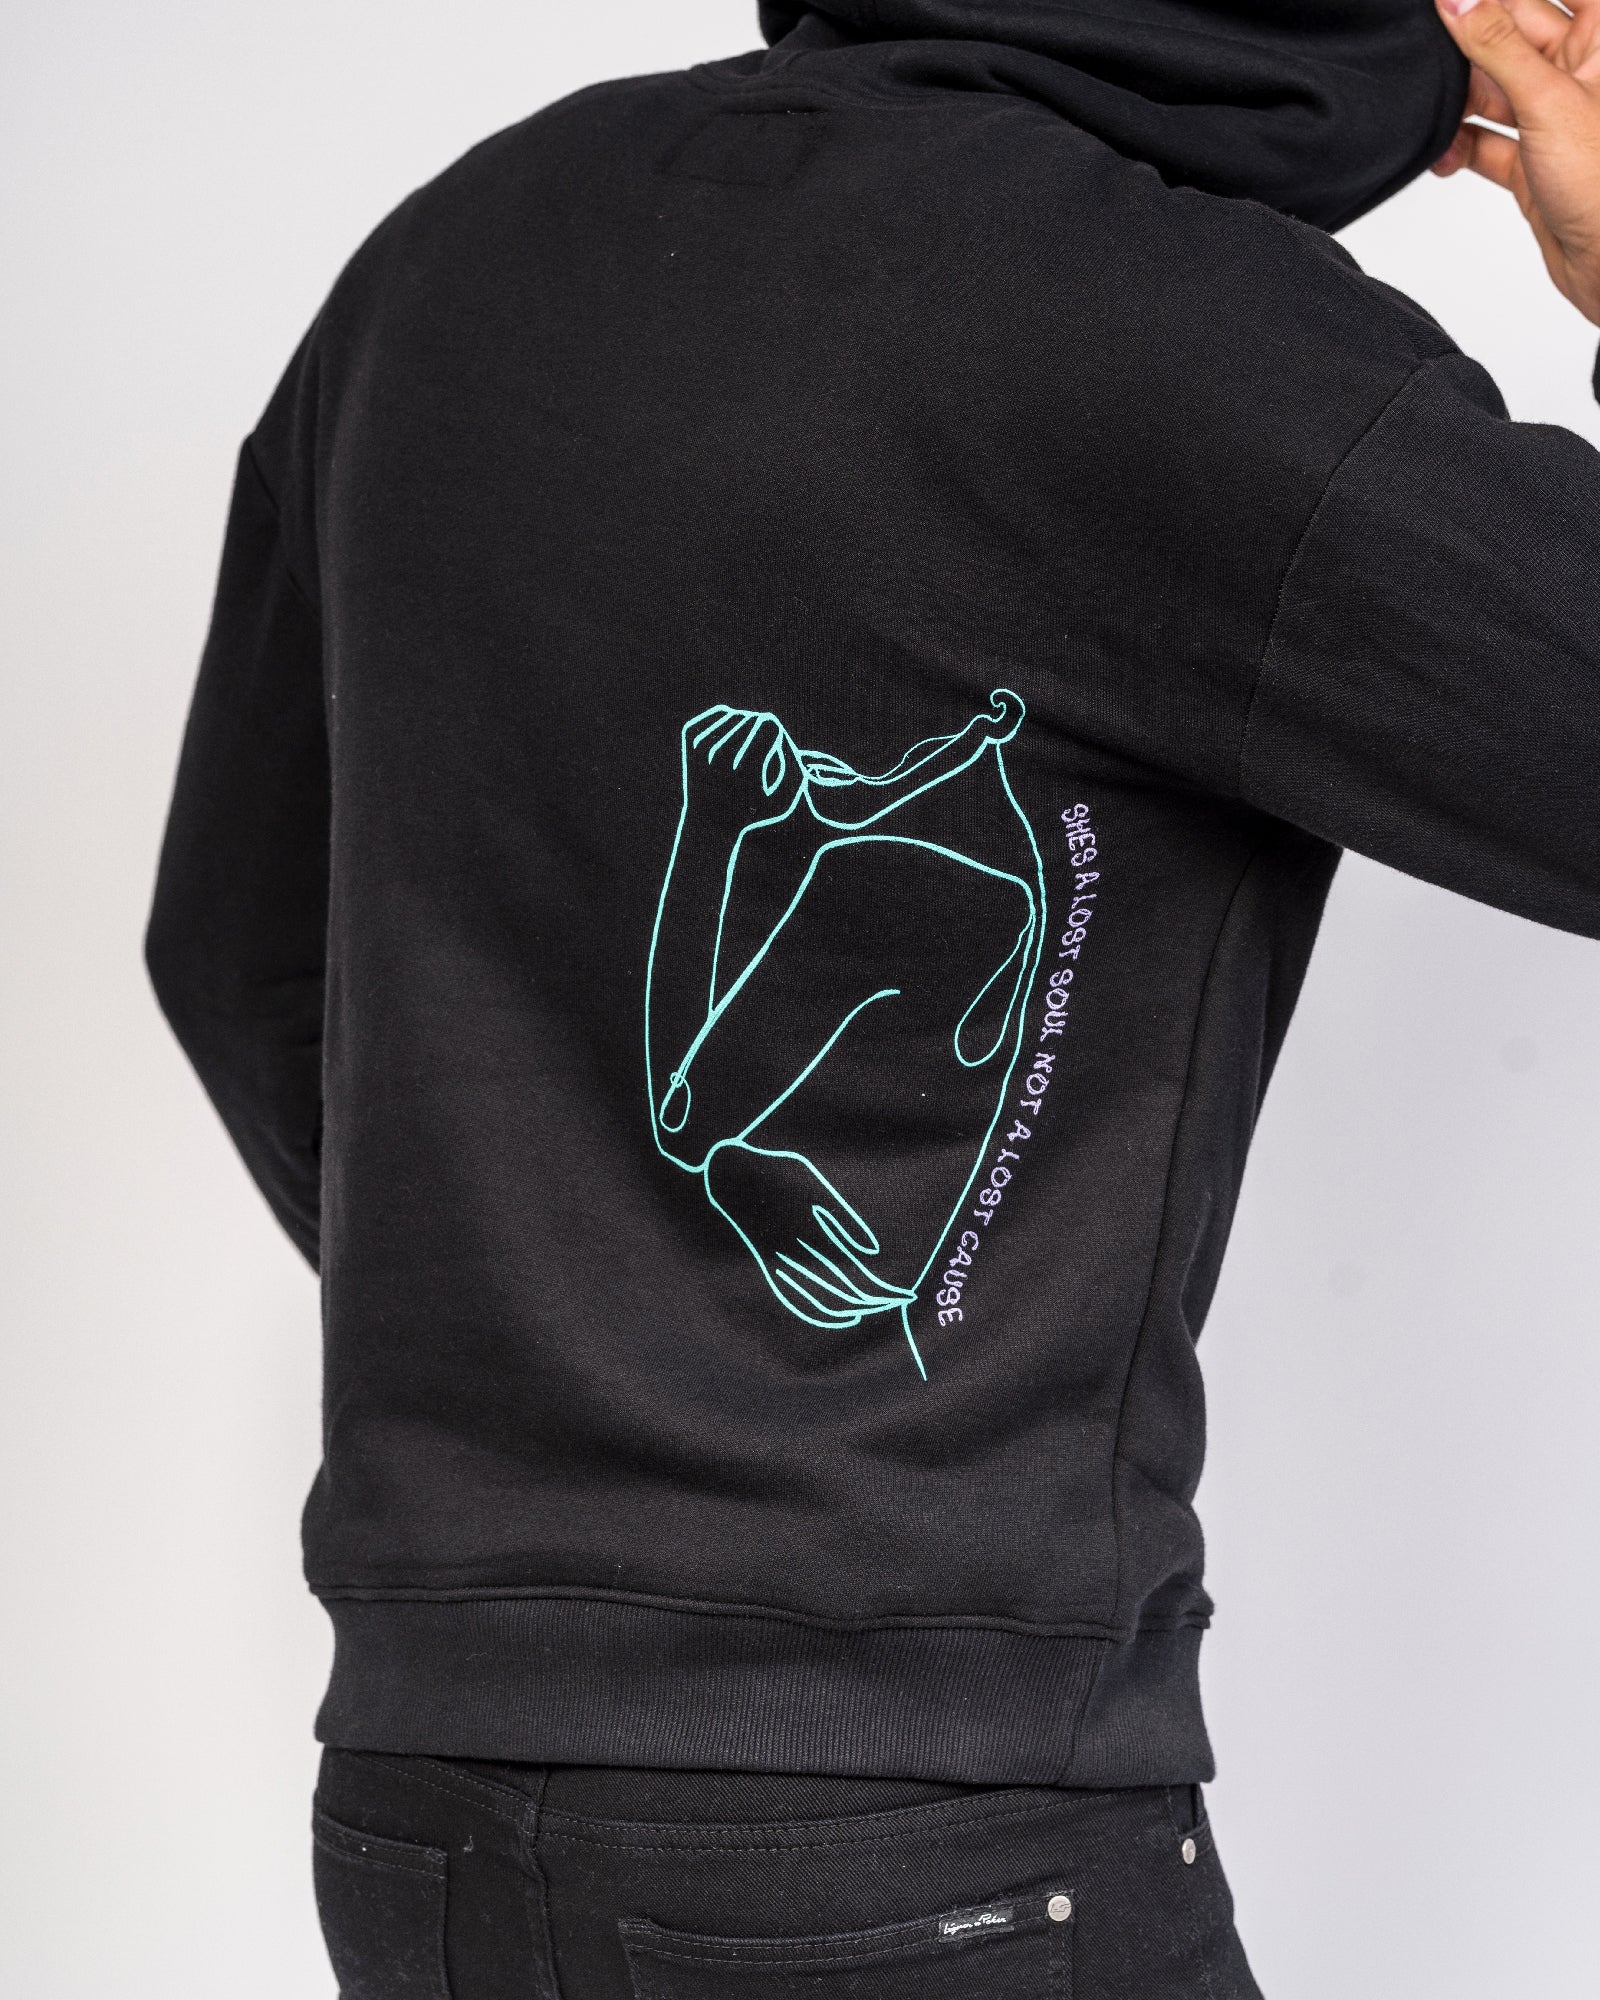 Illustrated Faces Relaxed Black Hoody